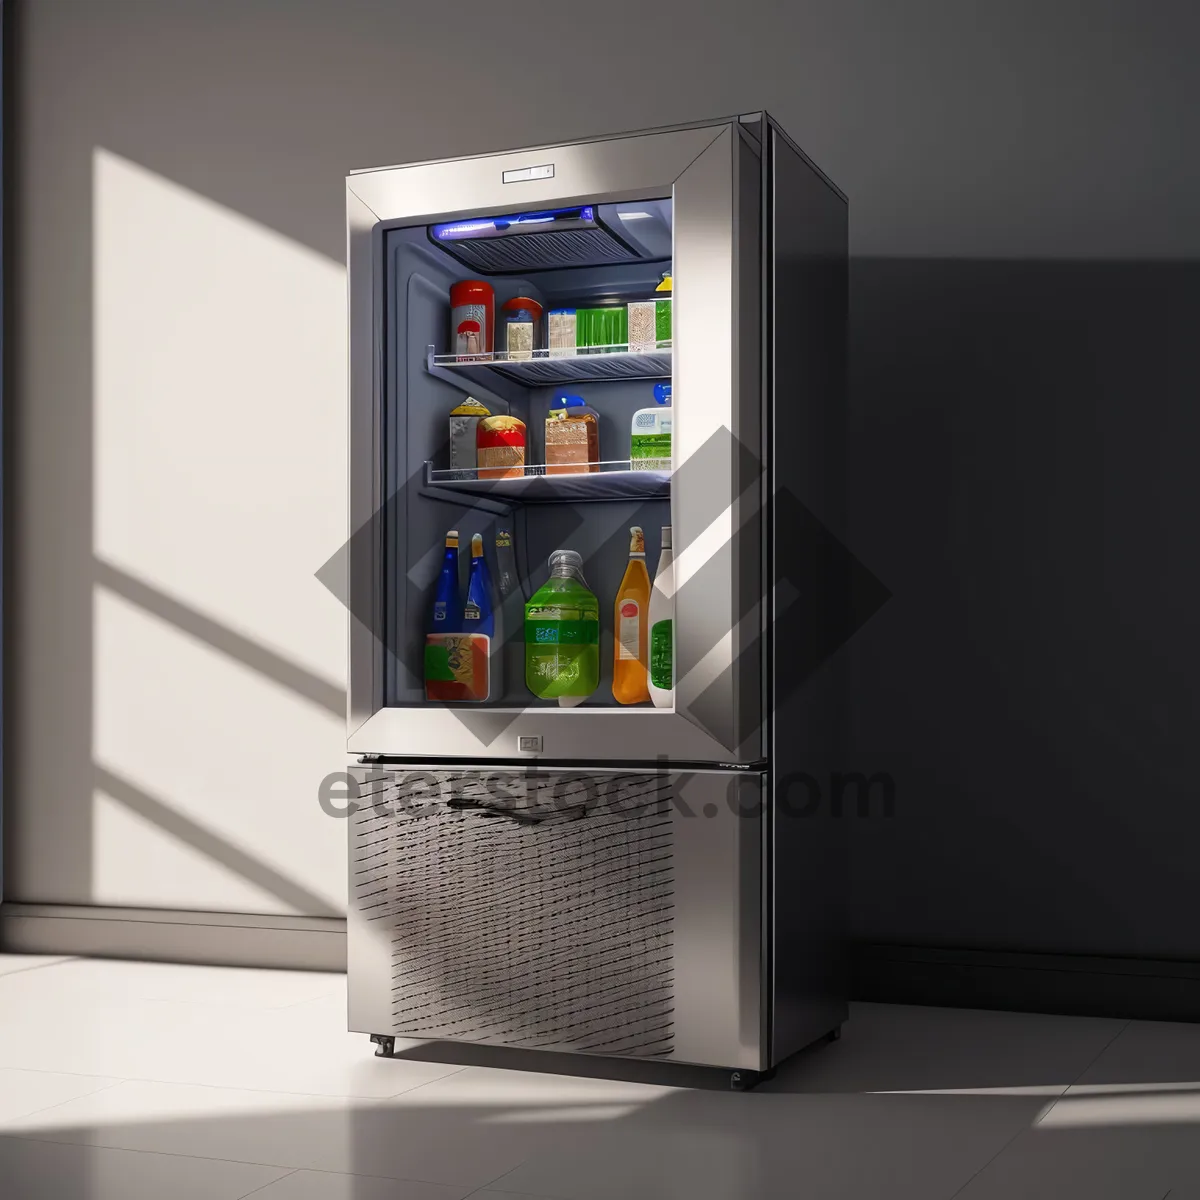 Picture of Modern Home Interior with Cooling System and Vending Machine